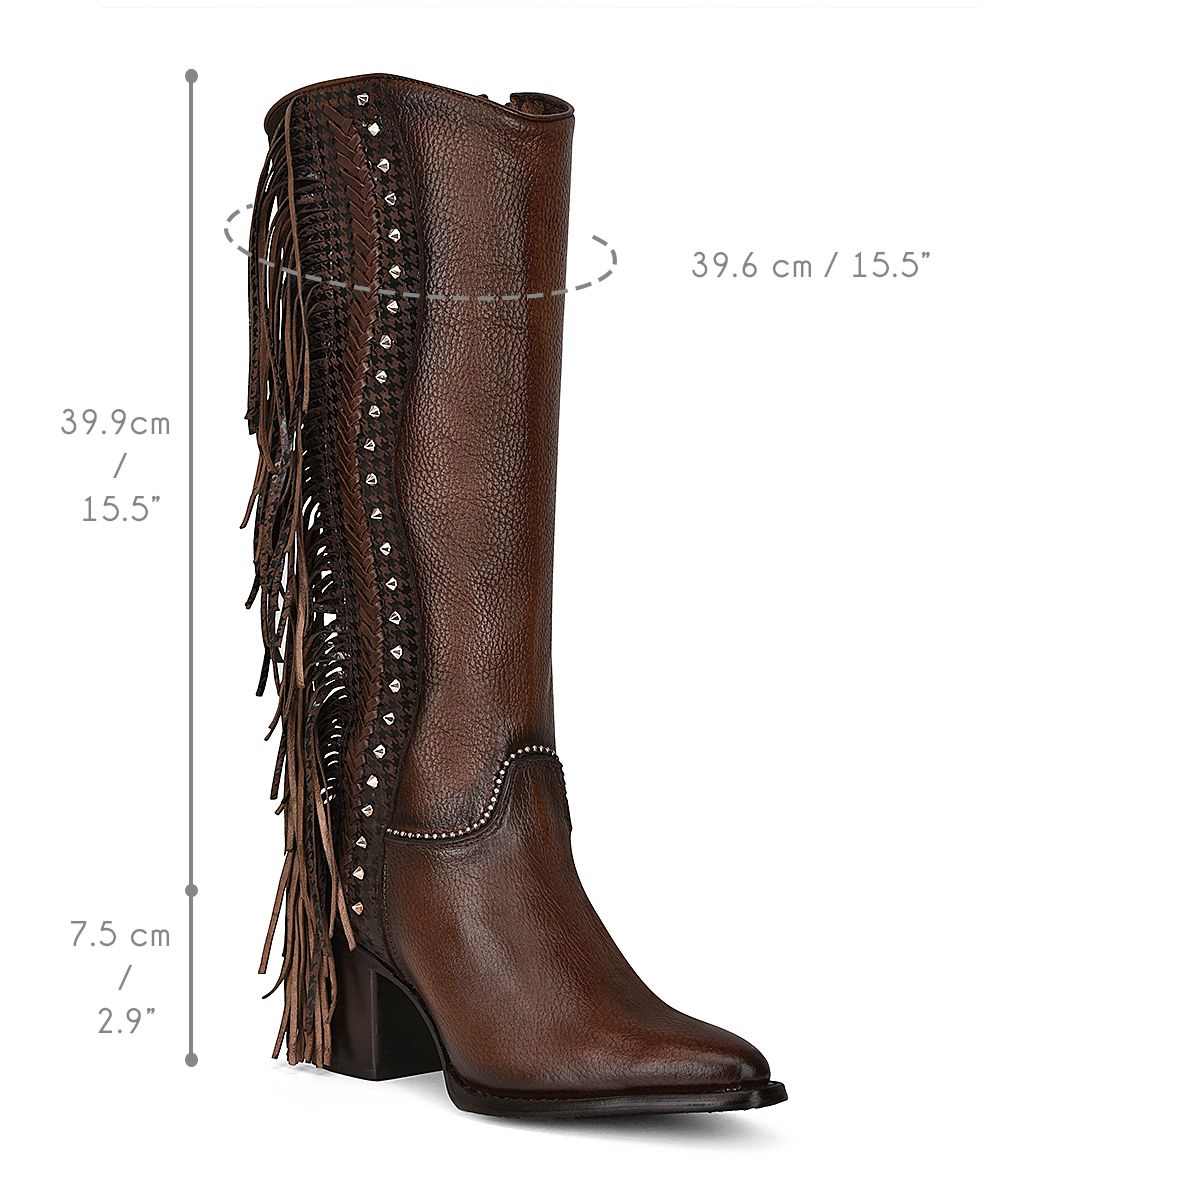 4Q03RS - Cuadra brown casual fashion cowhide leather strapped boots for women-CUADRA-Kuet-Cuadra-Boots